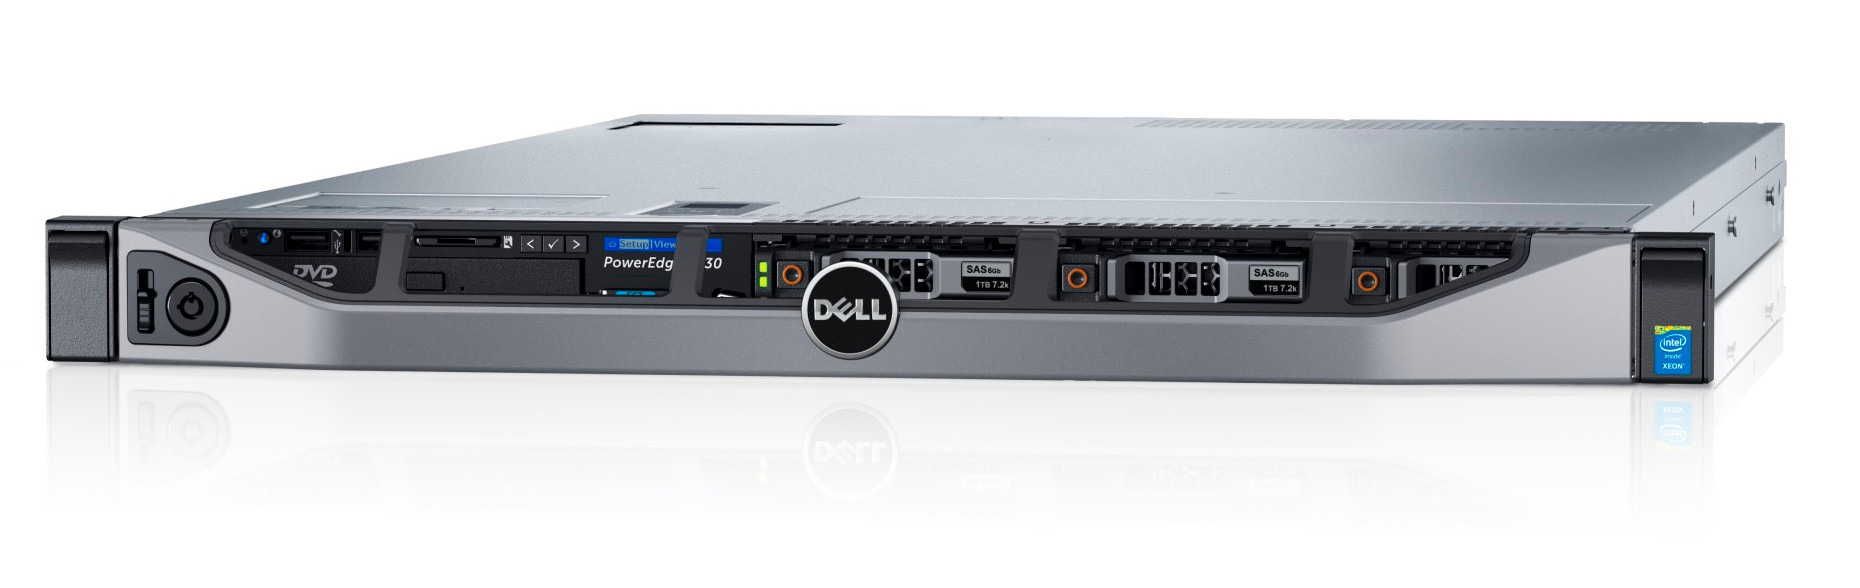 Dell Poweredge Serial Number Lookup